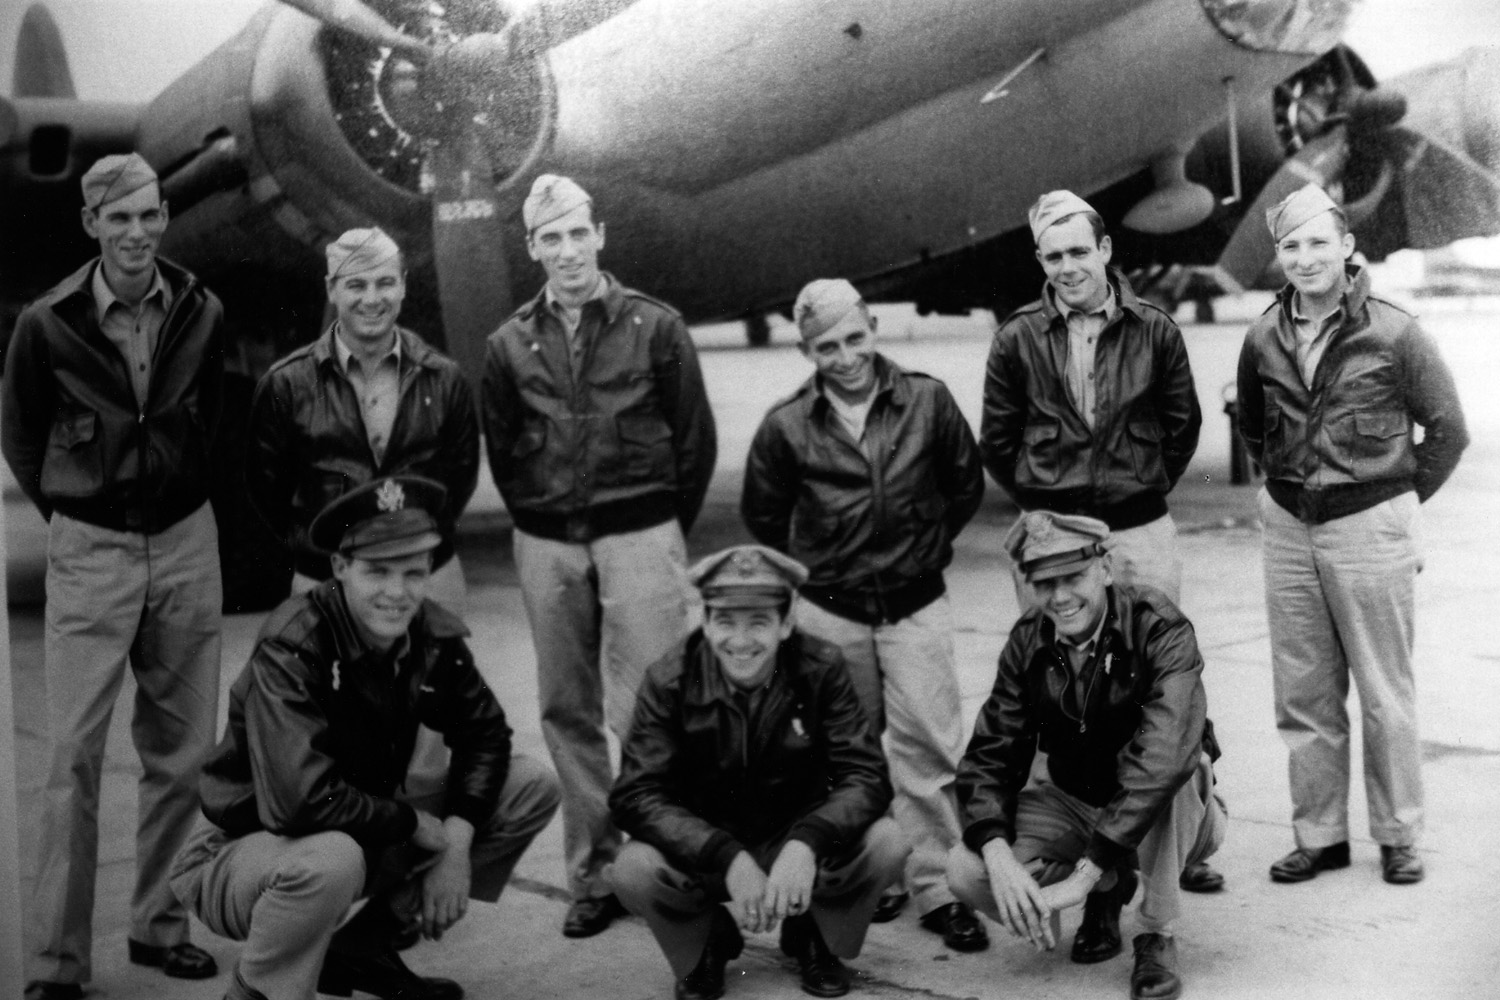 Ralph Patton is seen (front row, center) with his B-17 bomber crew. Patton was one of many downed airmen who were assisted by French patriots to avoid capture.